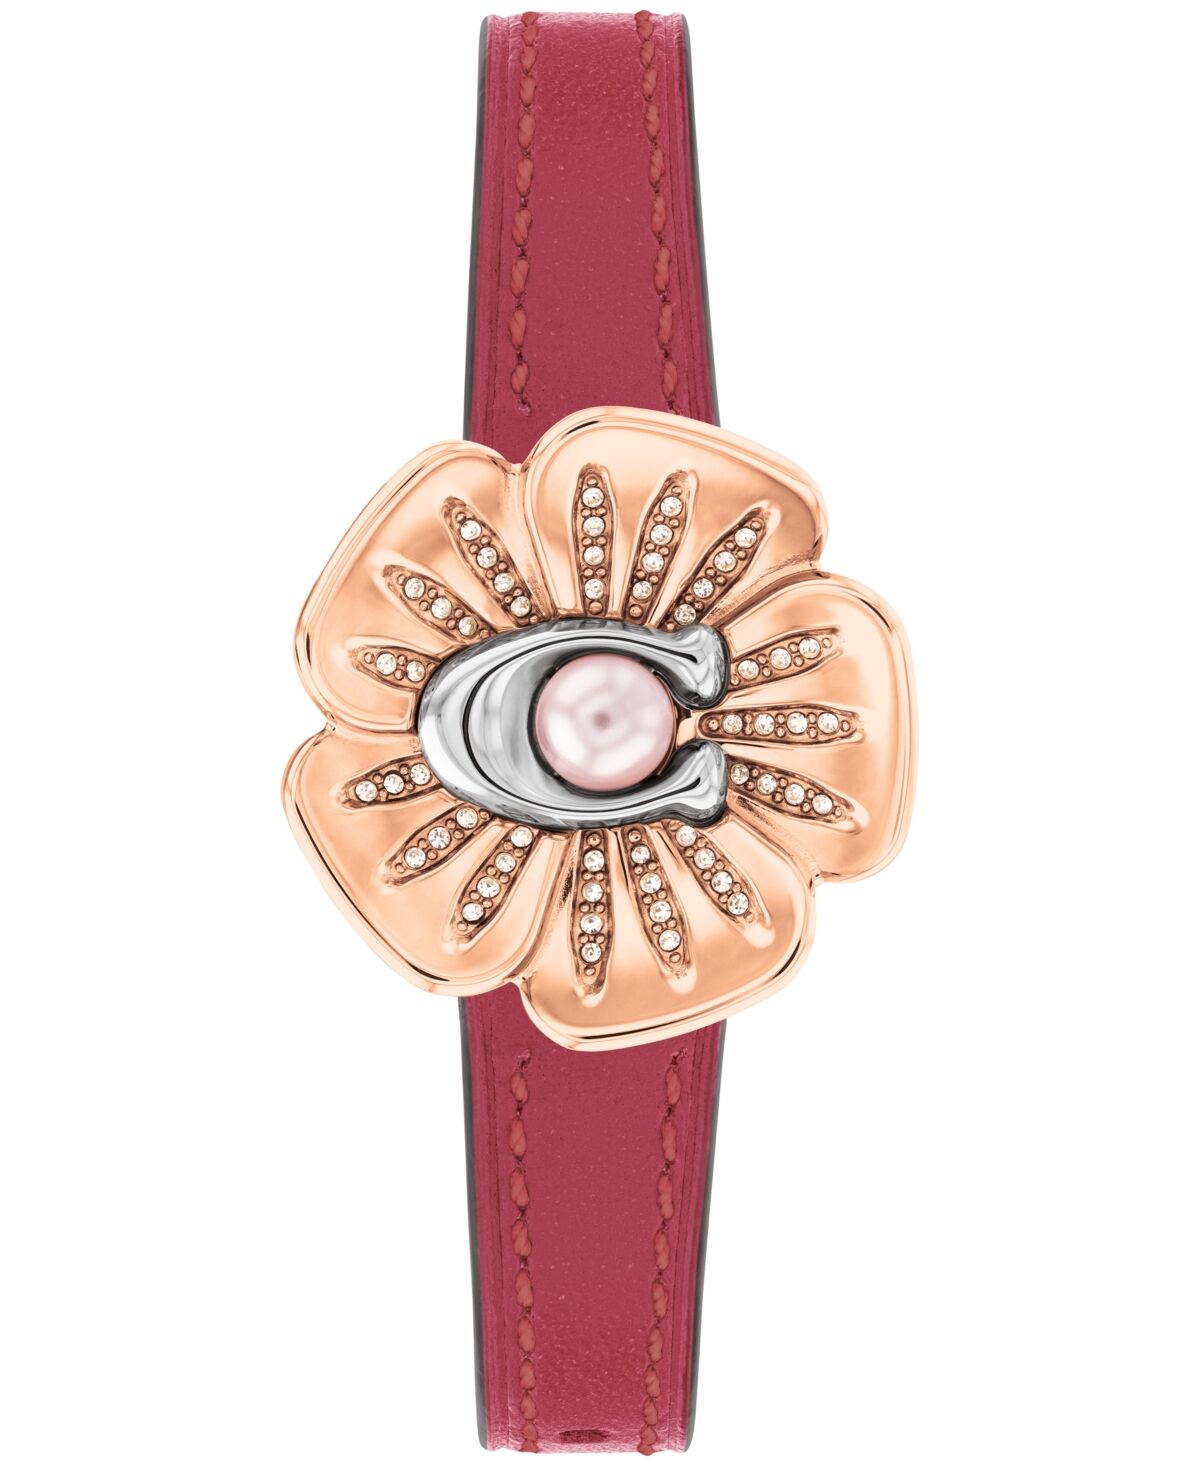 Coach Women's Tea Rose Rouge Leather Strap Watch, 29mm - Rouge